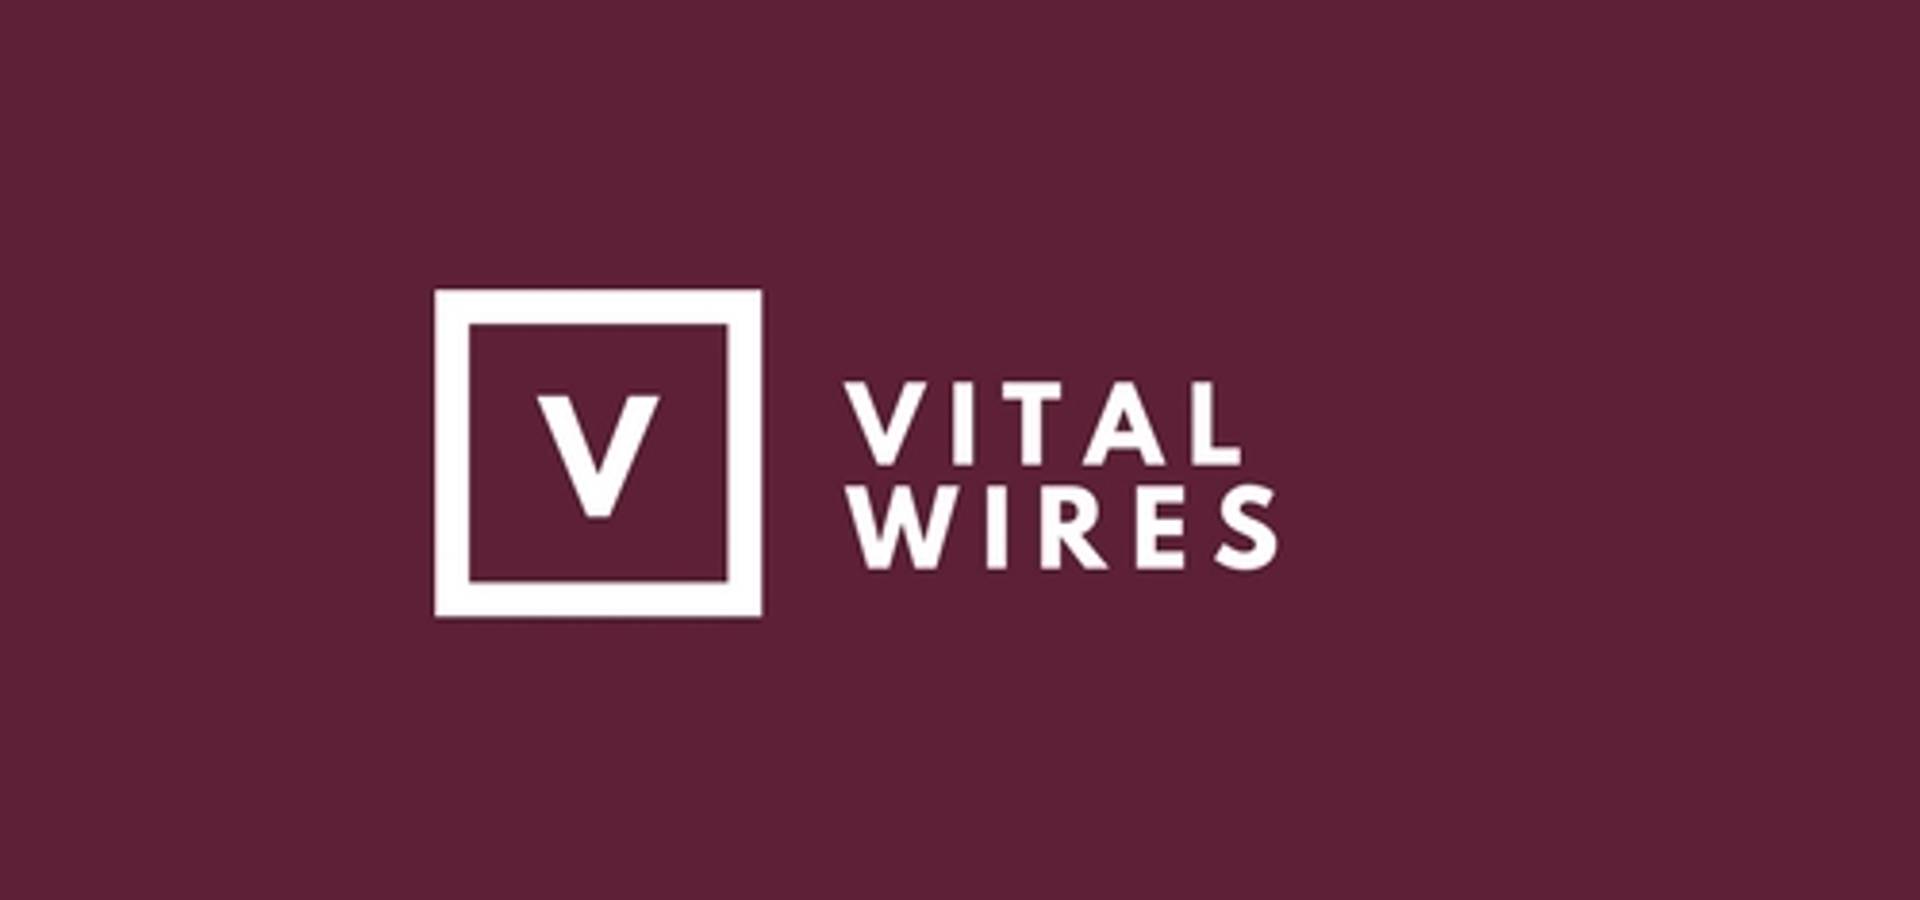 Vital Wires SAP Consulting Services – India